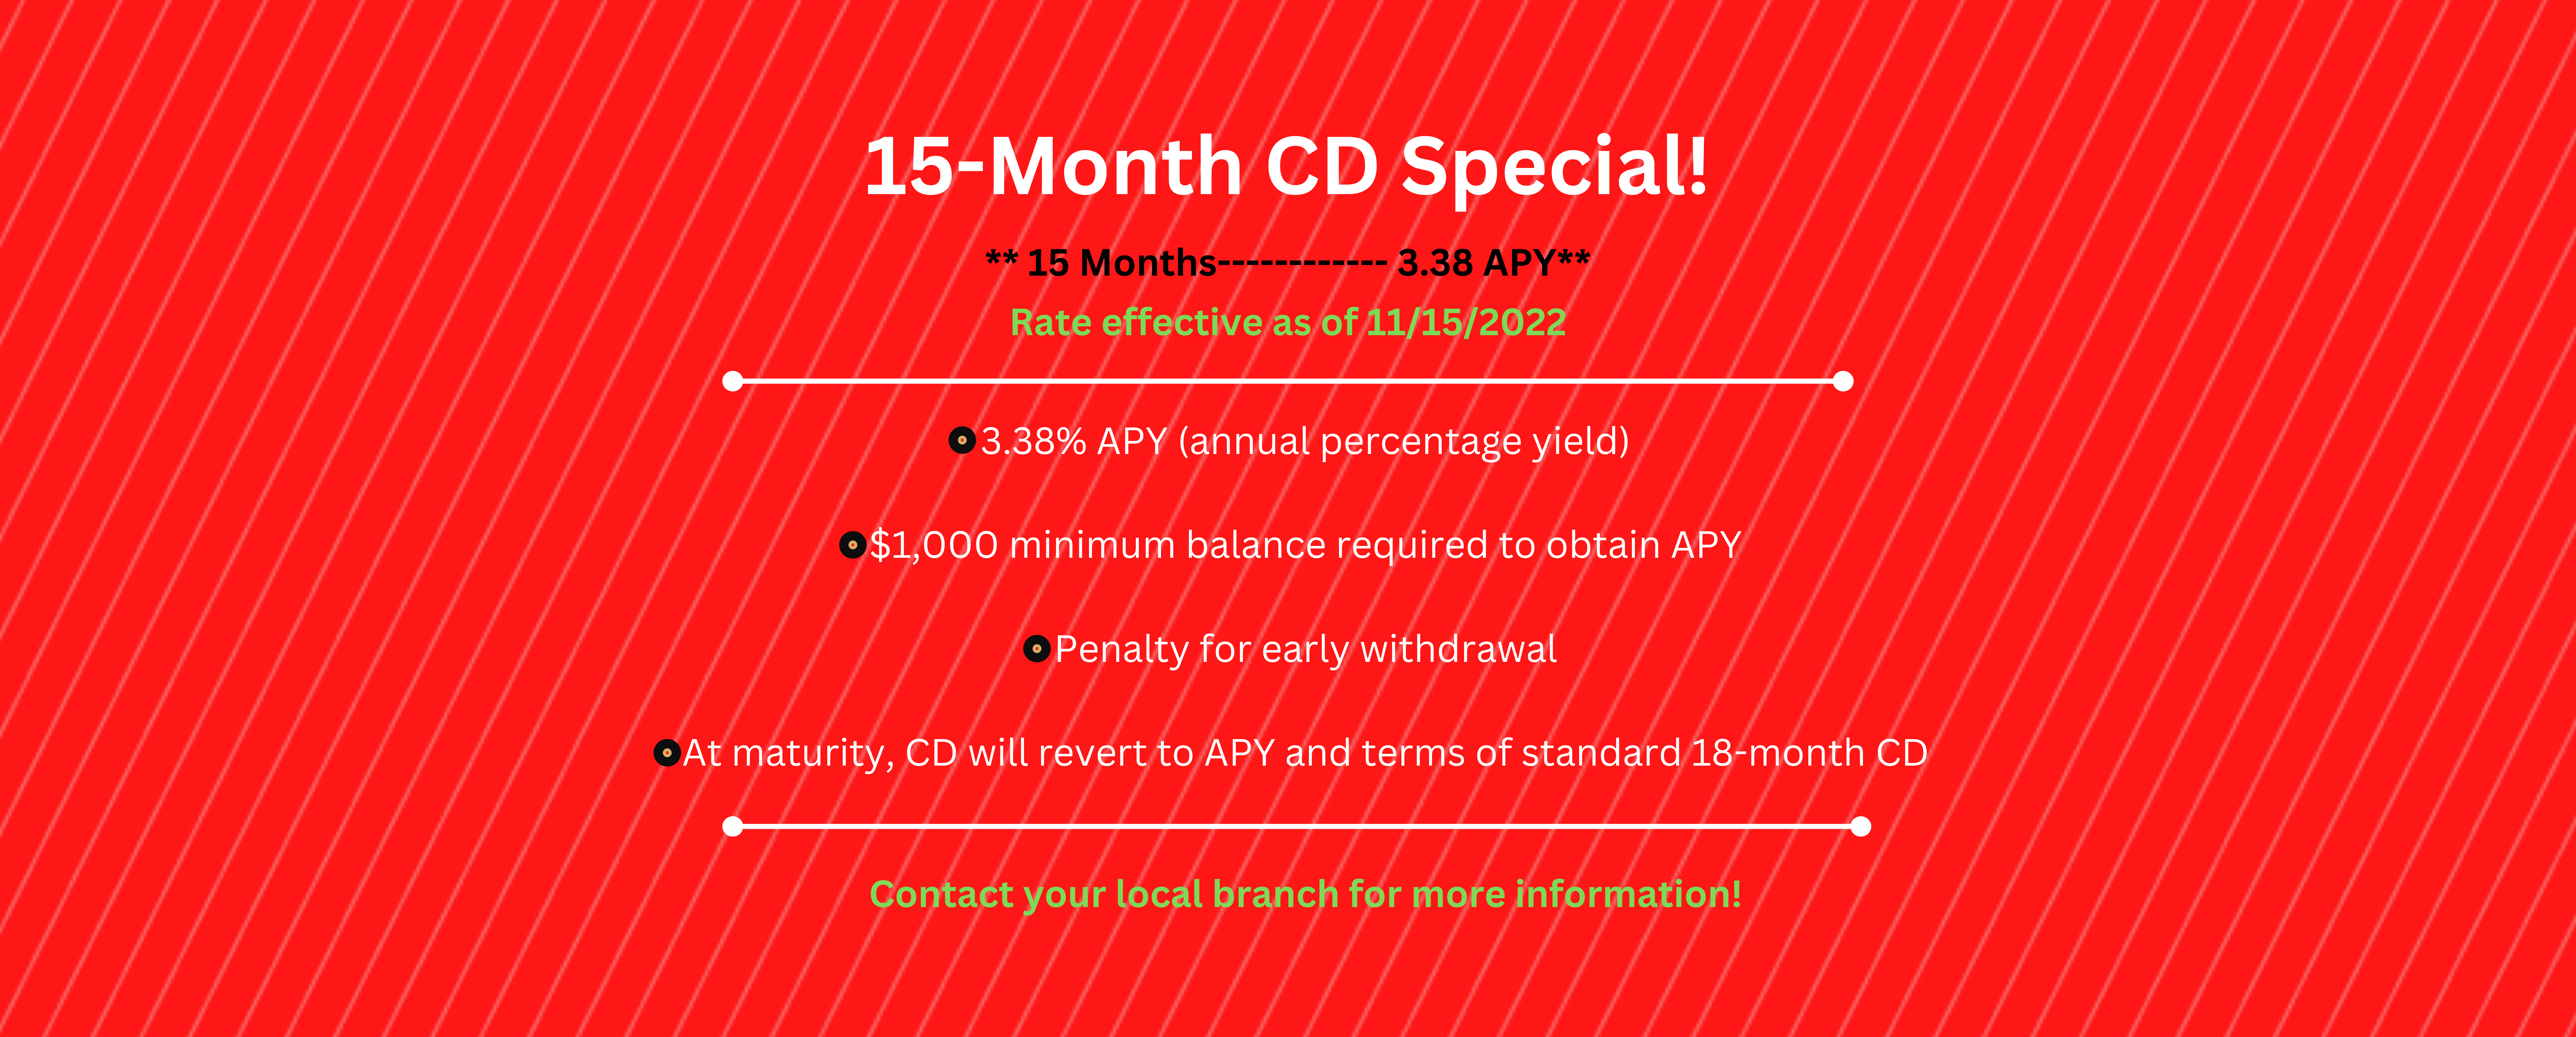 15 month CD special @ 3.38%